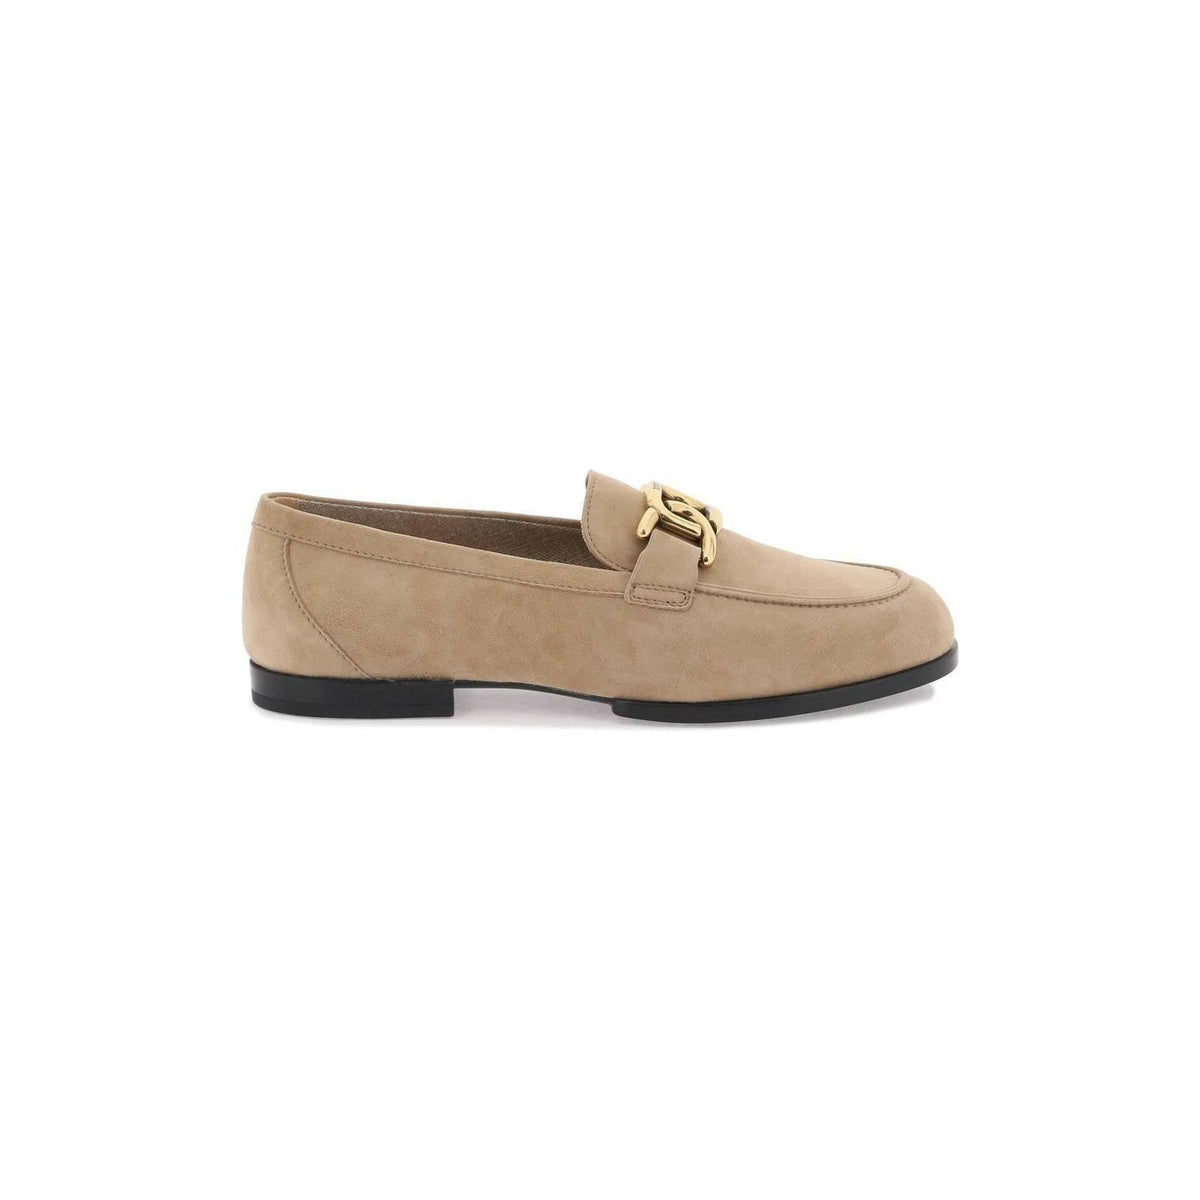 TOD'S - Kate Suede Loafers - JOHN JULIA